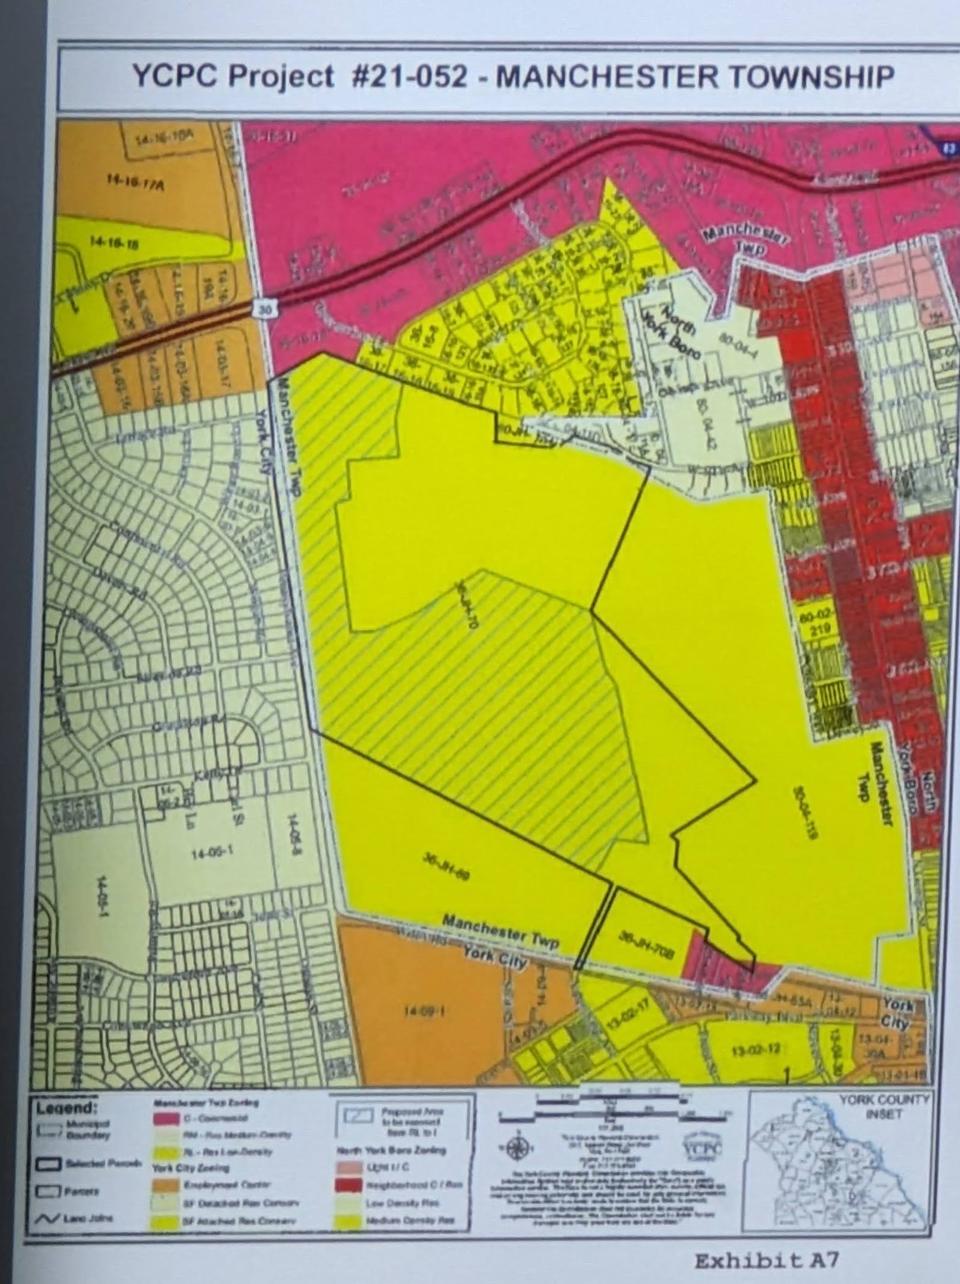 A zoning map that was used during a presentation that shows the rezoned land (in green slashes) that was subdivided, sold and rezoned off of Prospect Hill Cemetery.